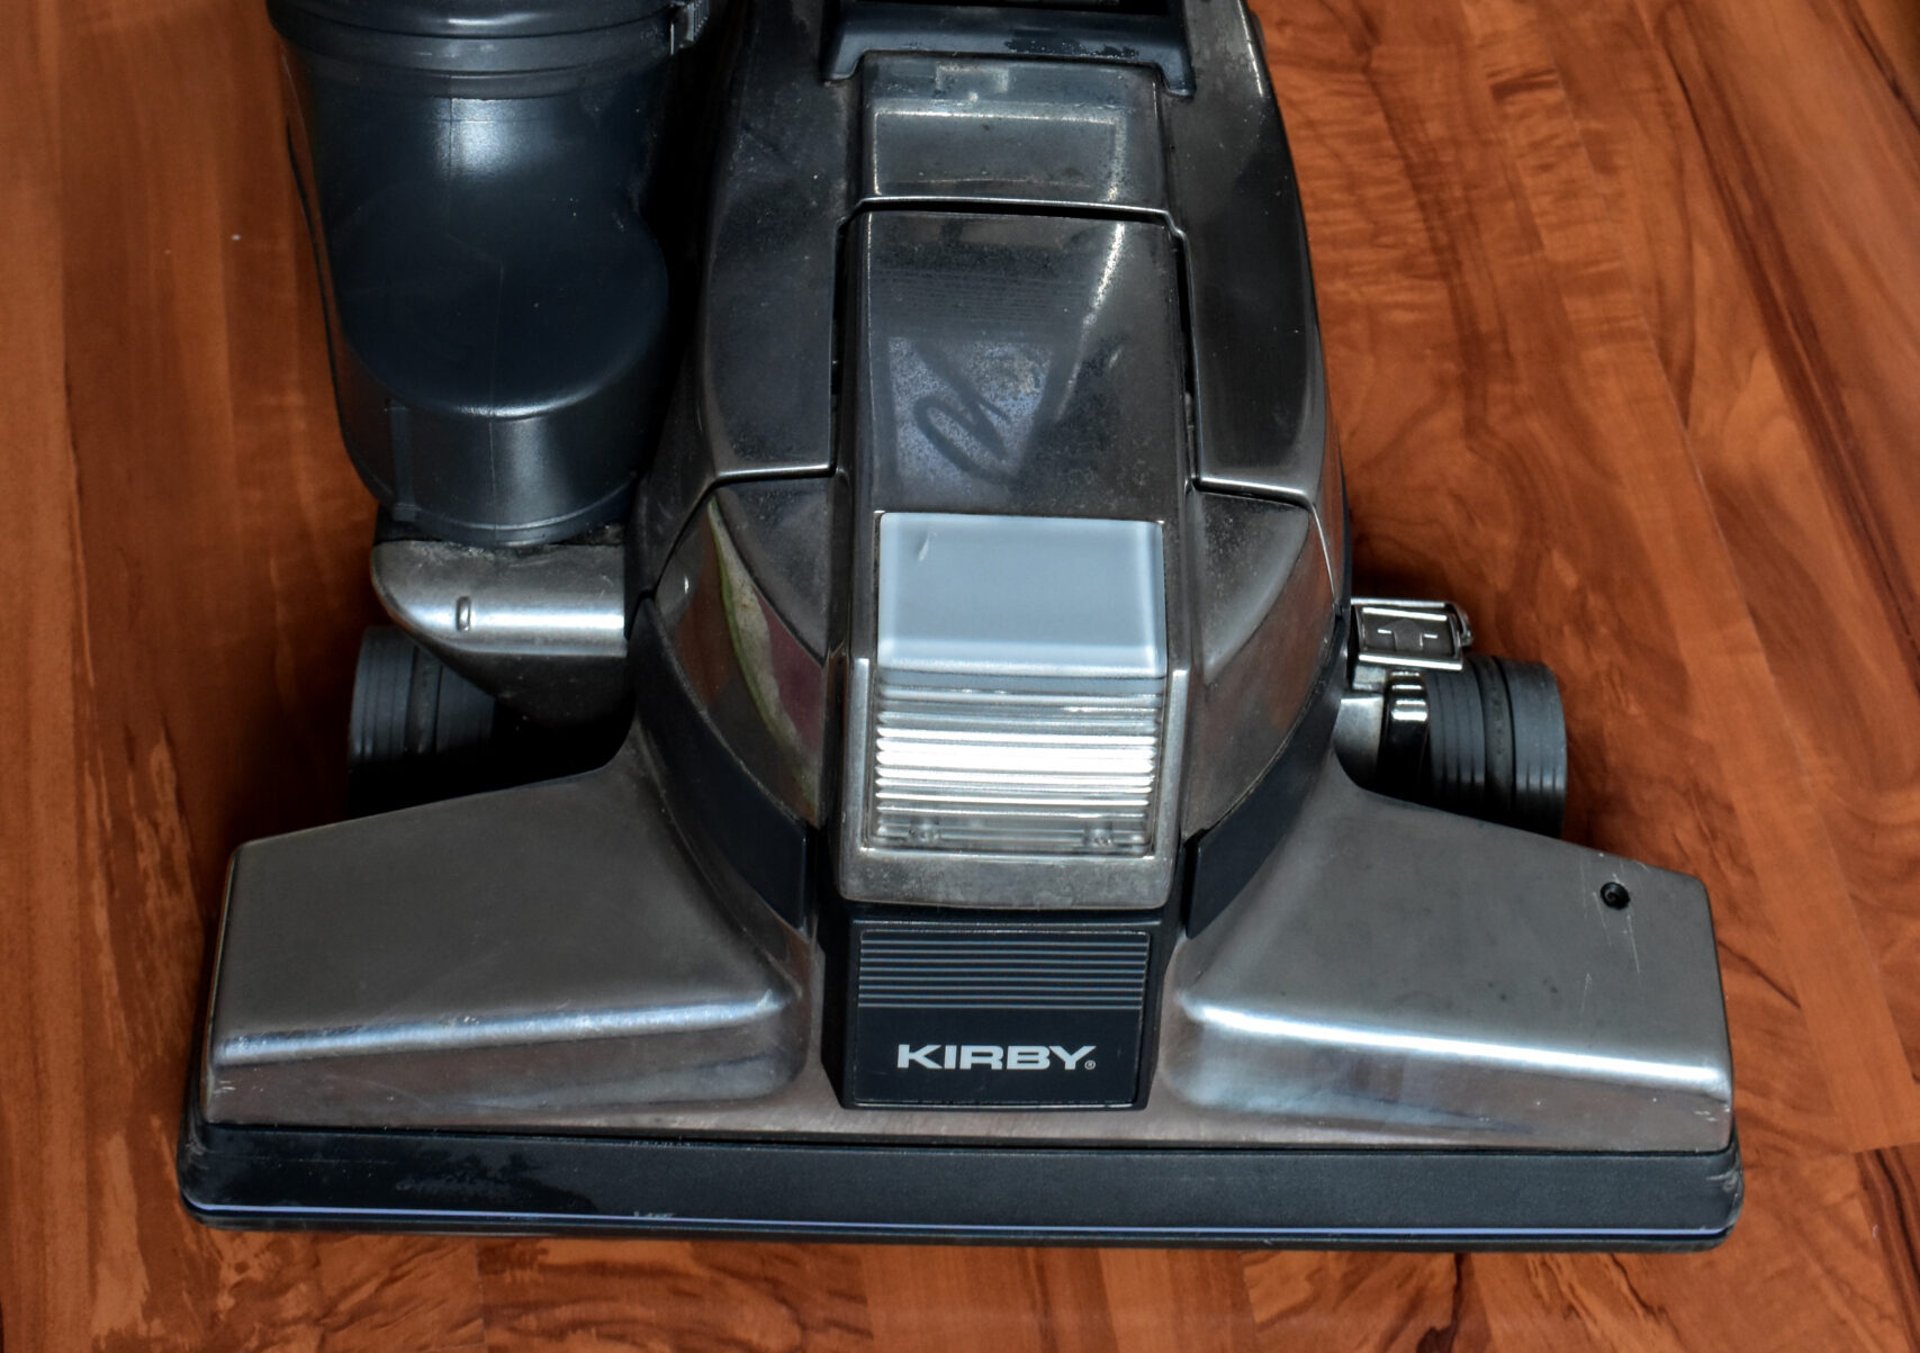 What is the Kirby vacuum? Is it still popular? - Quora